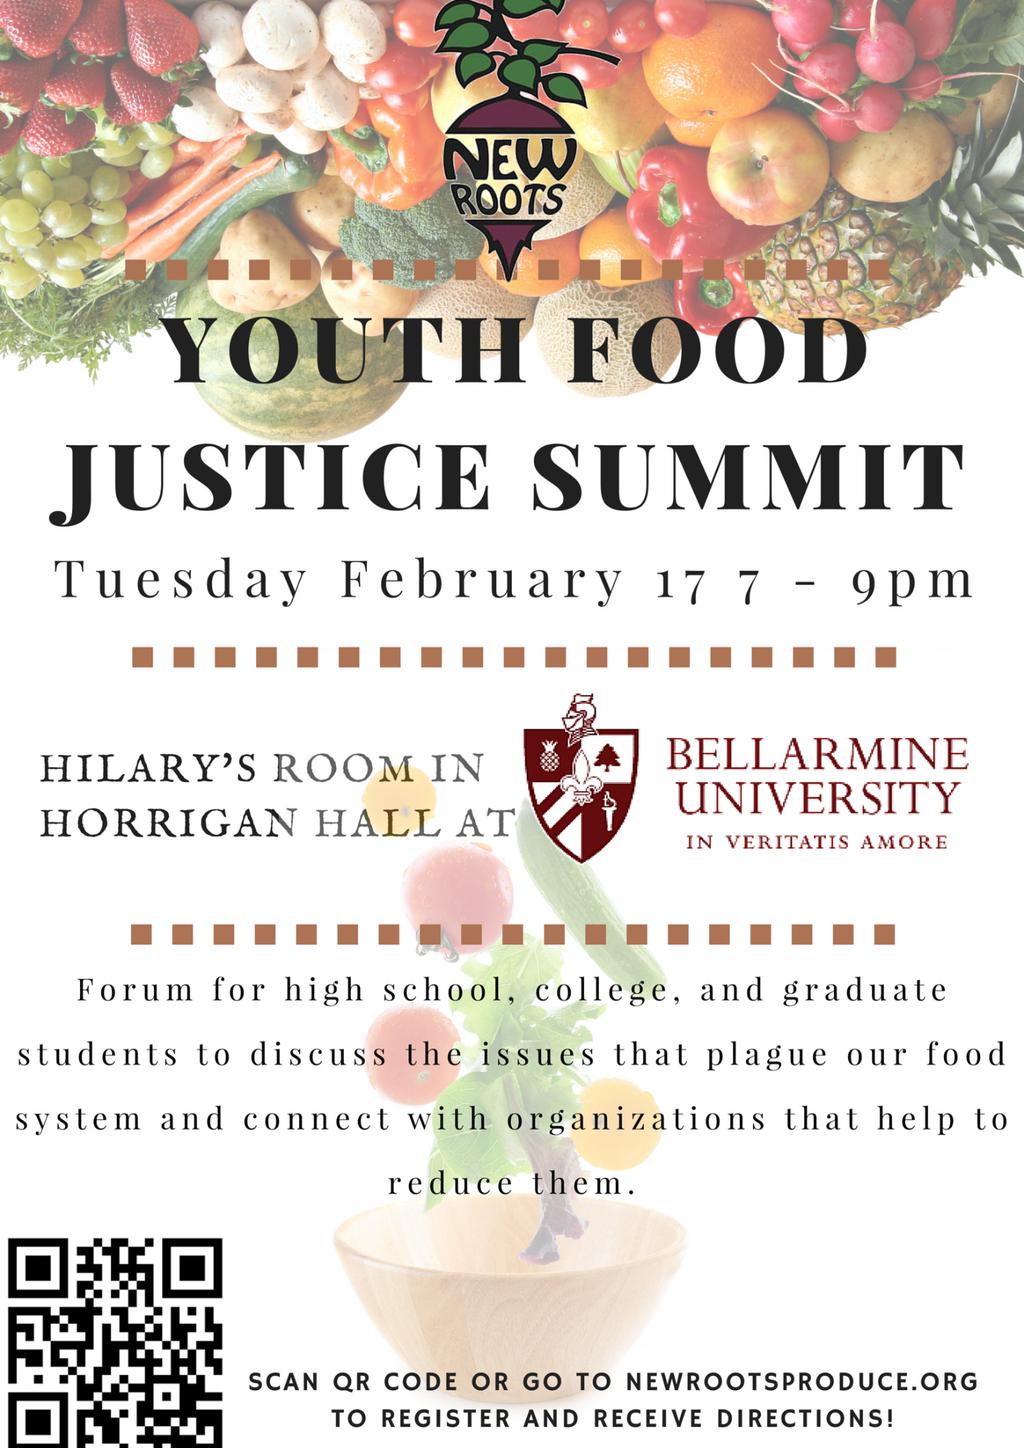 youthfoodjustice